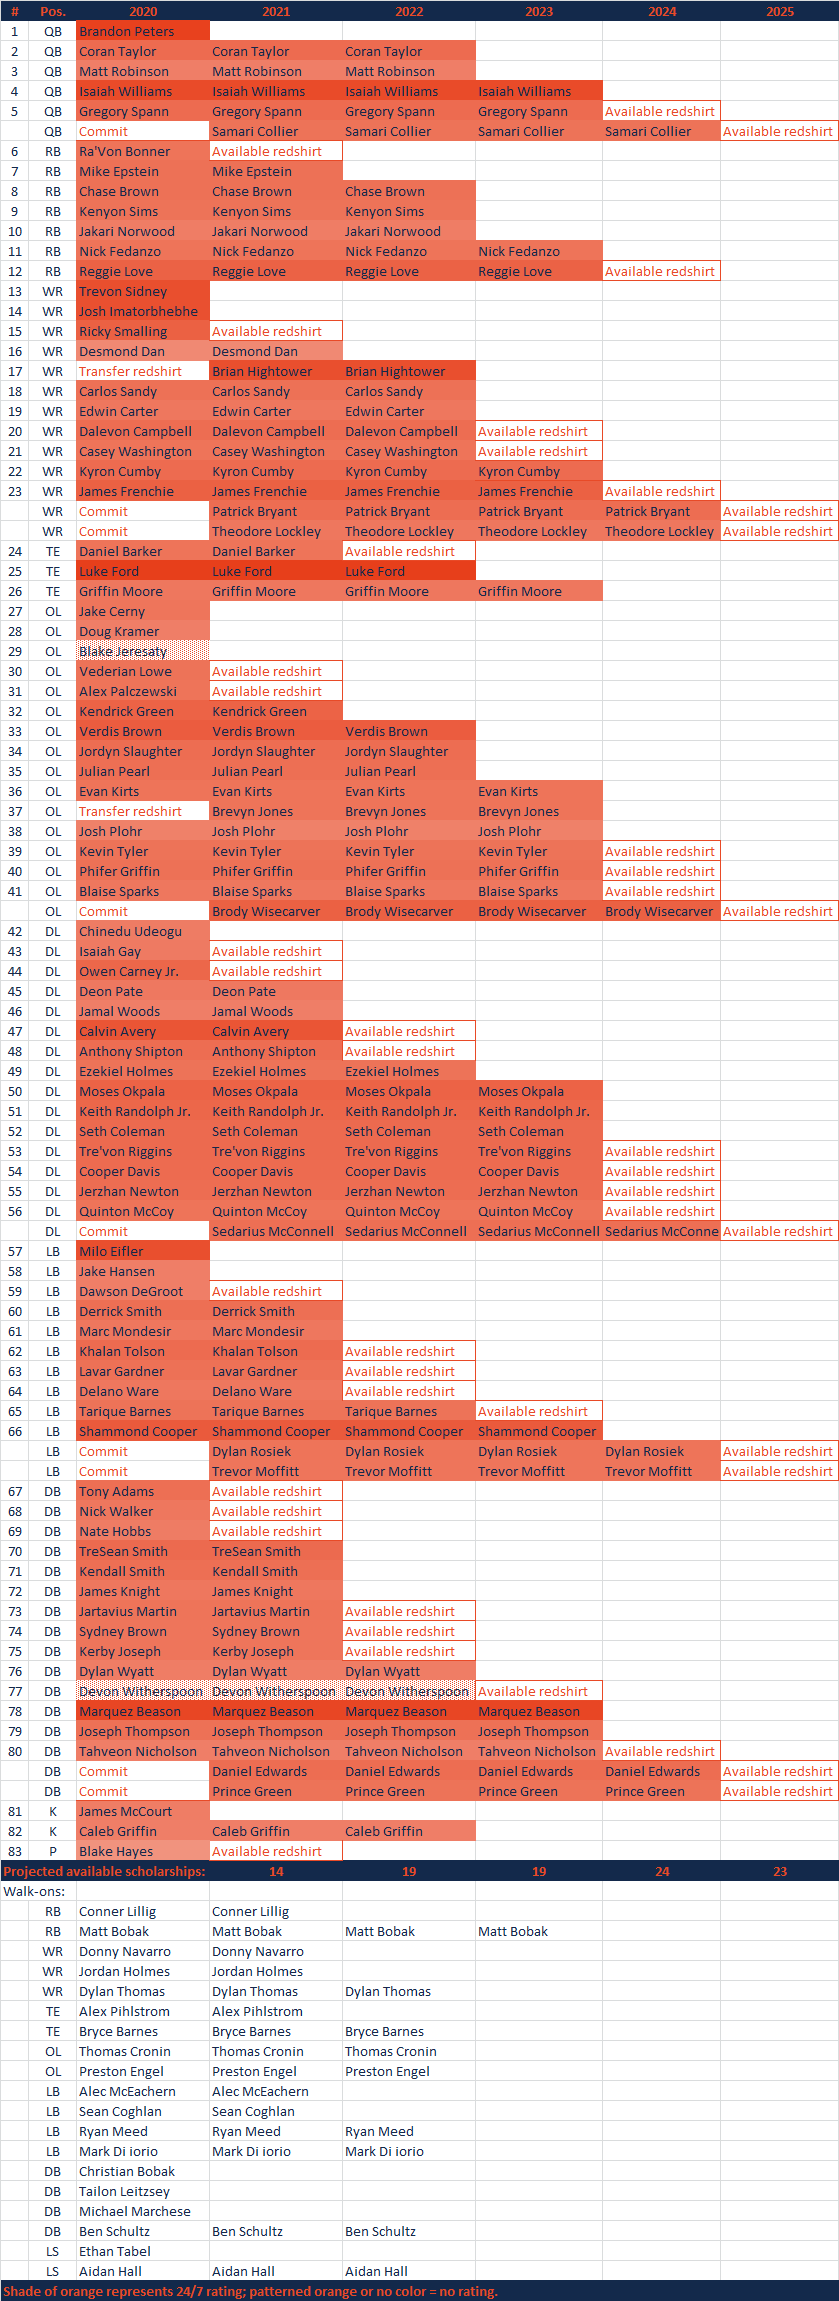 2020ScholarshipGrid0619.png